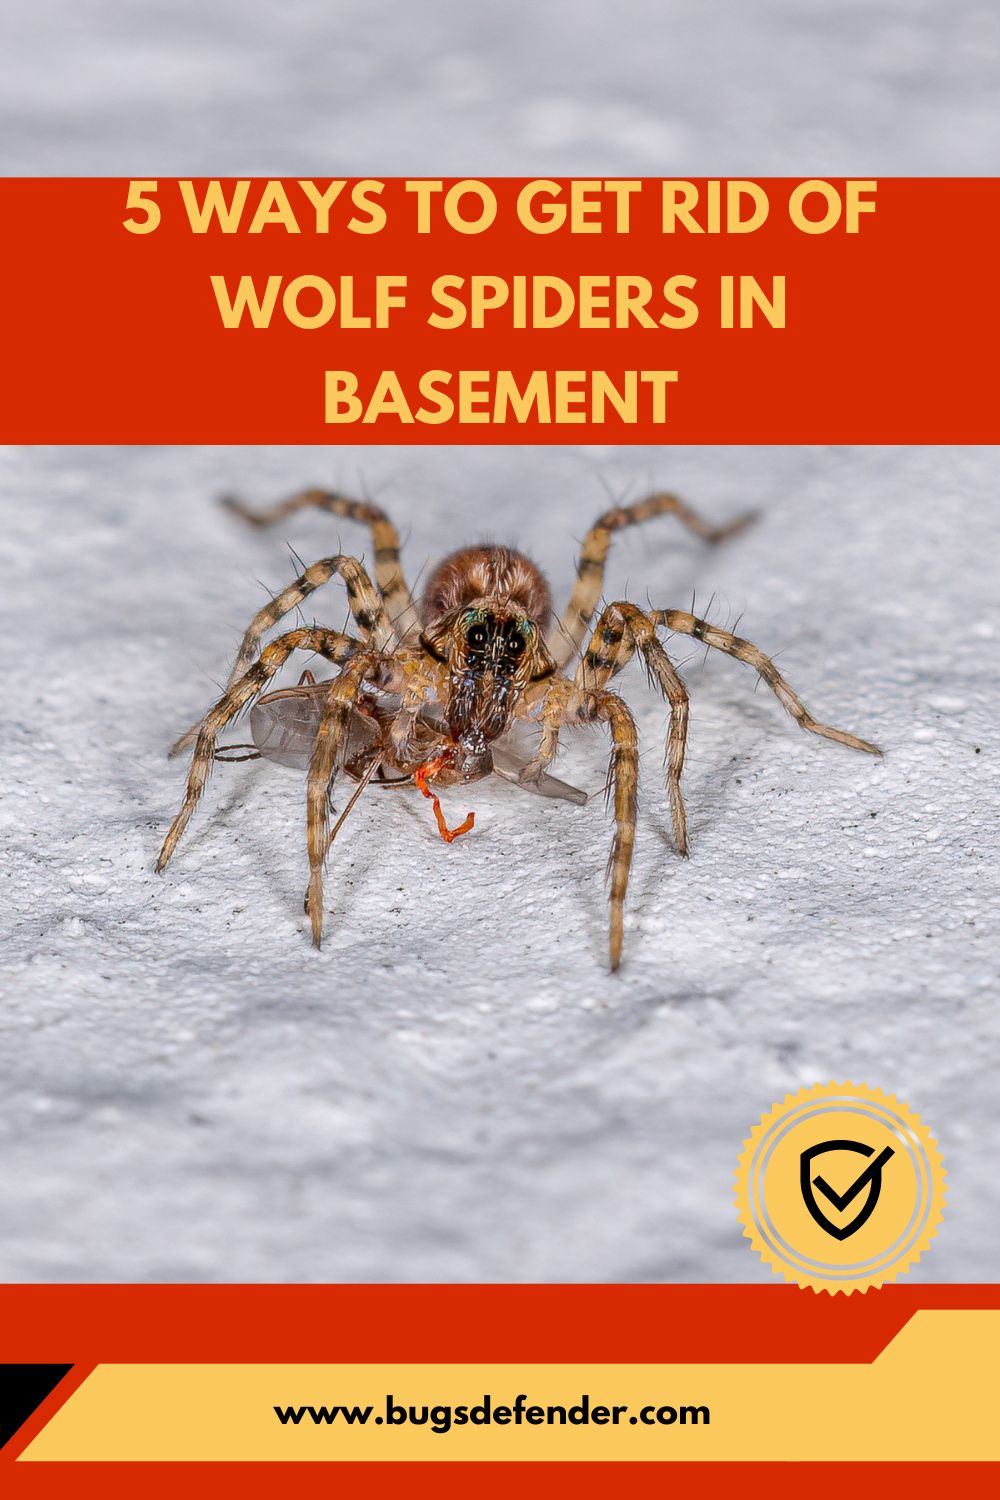 5 Ways to Get Rid of Wolf Spiders in Basement pin 2